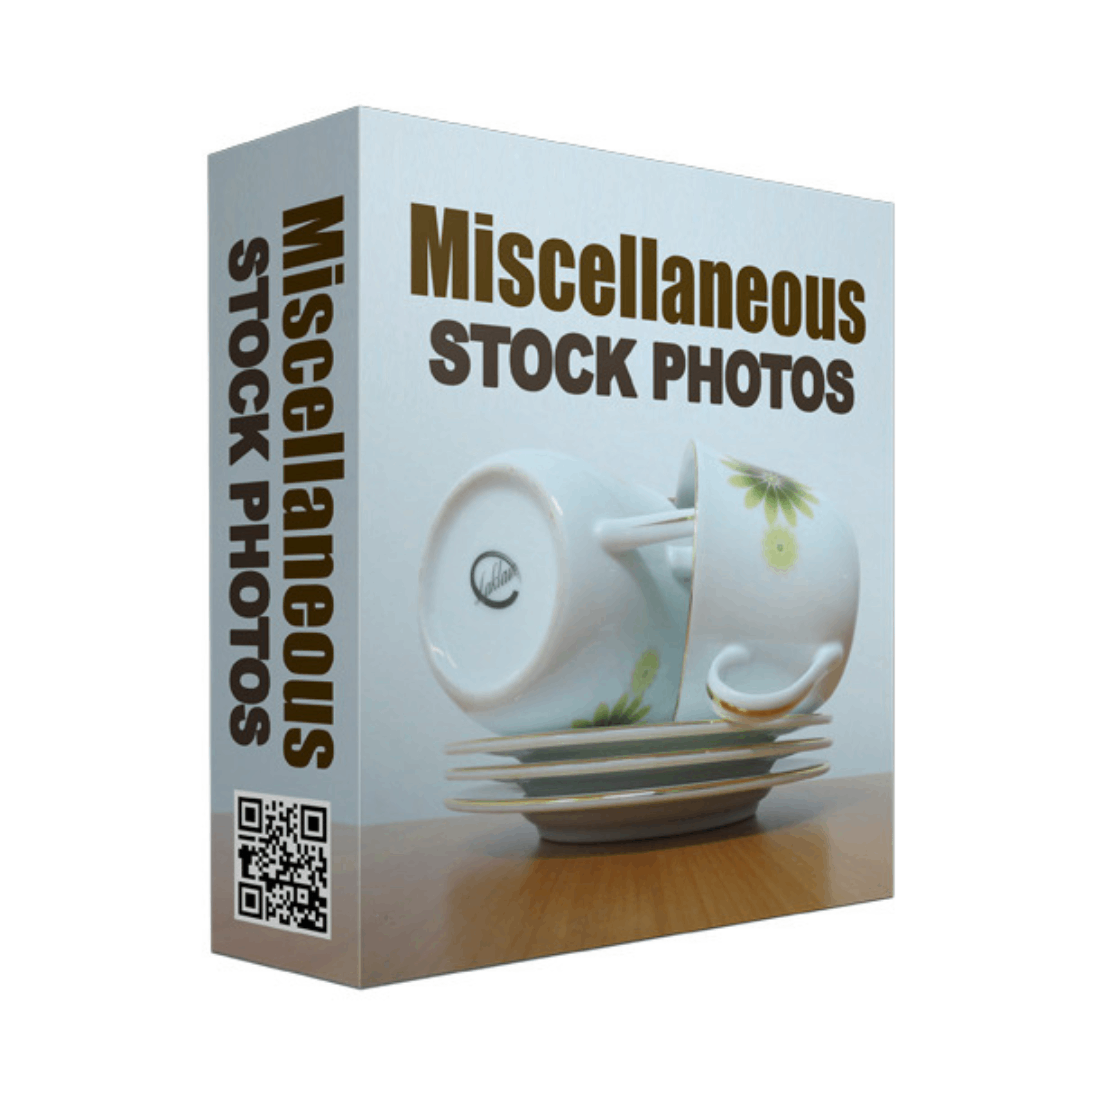 Miscellaneous Stock Images Bundle of 50 Photos cover image.